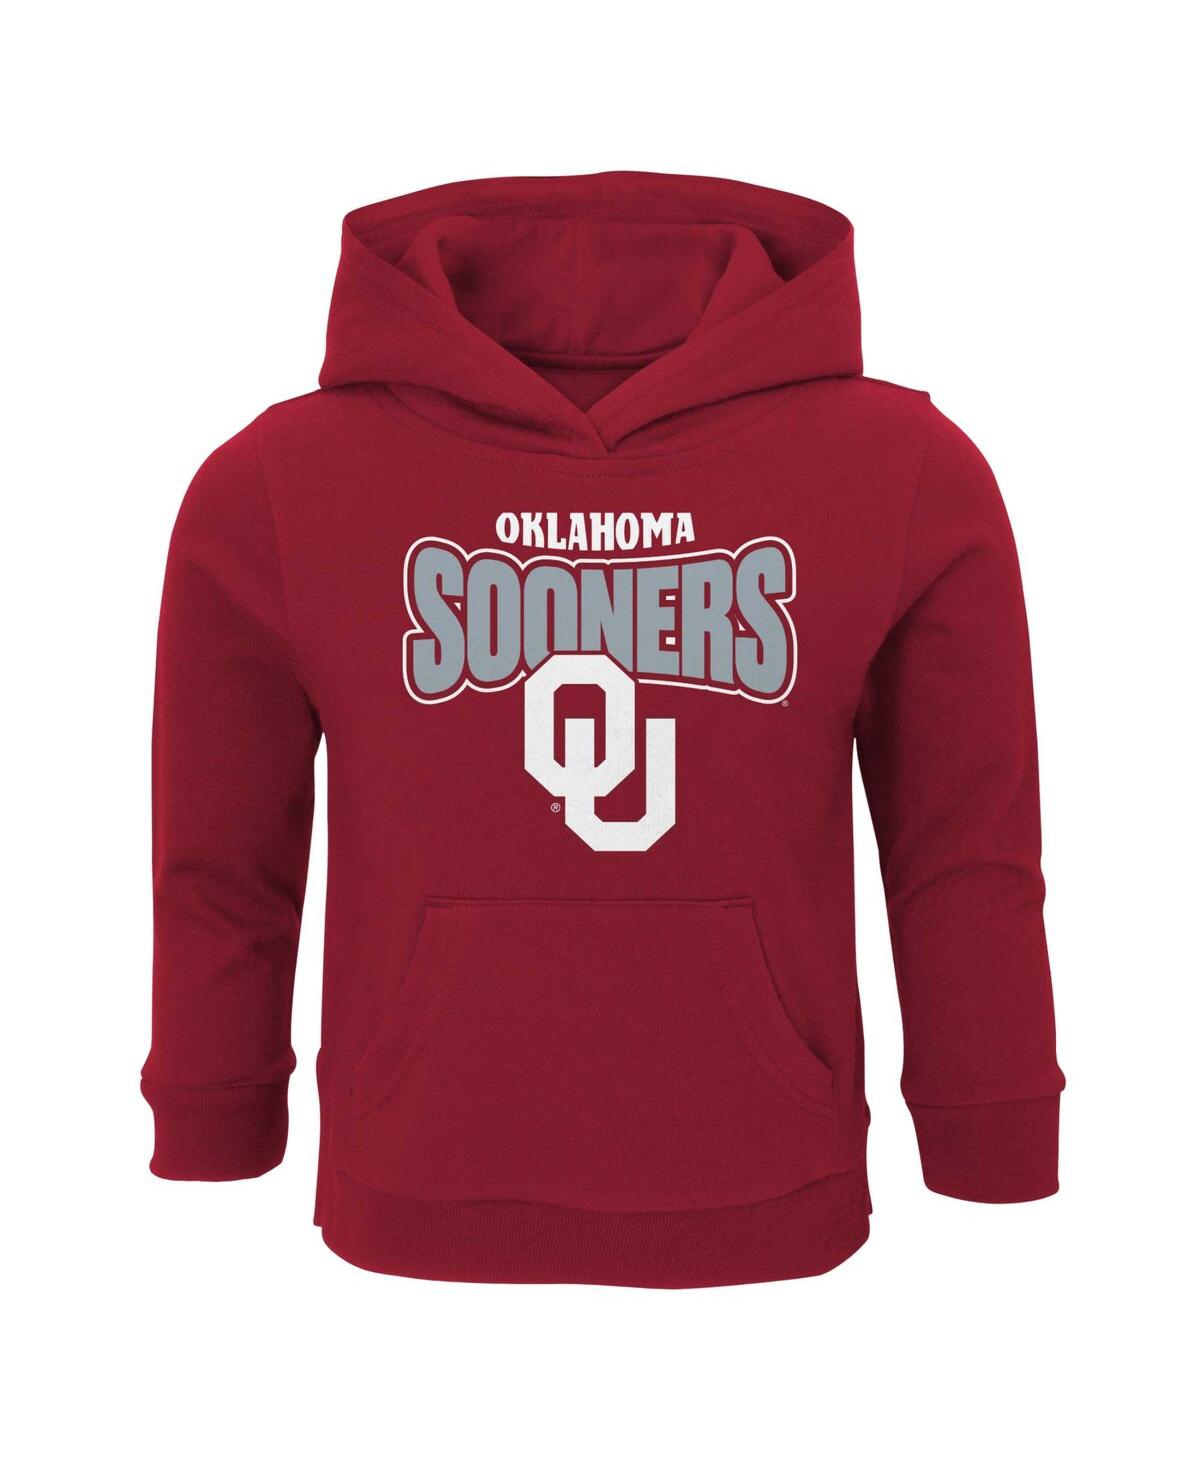 Outerstuff Babies' Toddler Boys And Girls Crimson Oklahoma Sooners Draft Pick Pullover Hoodie